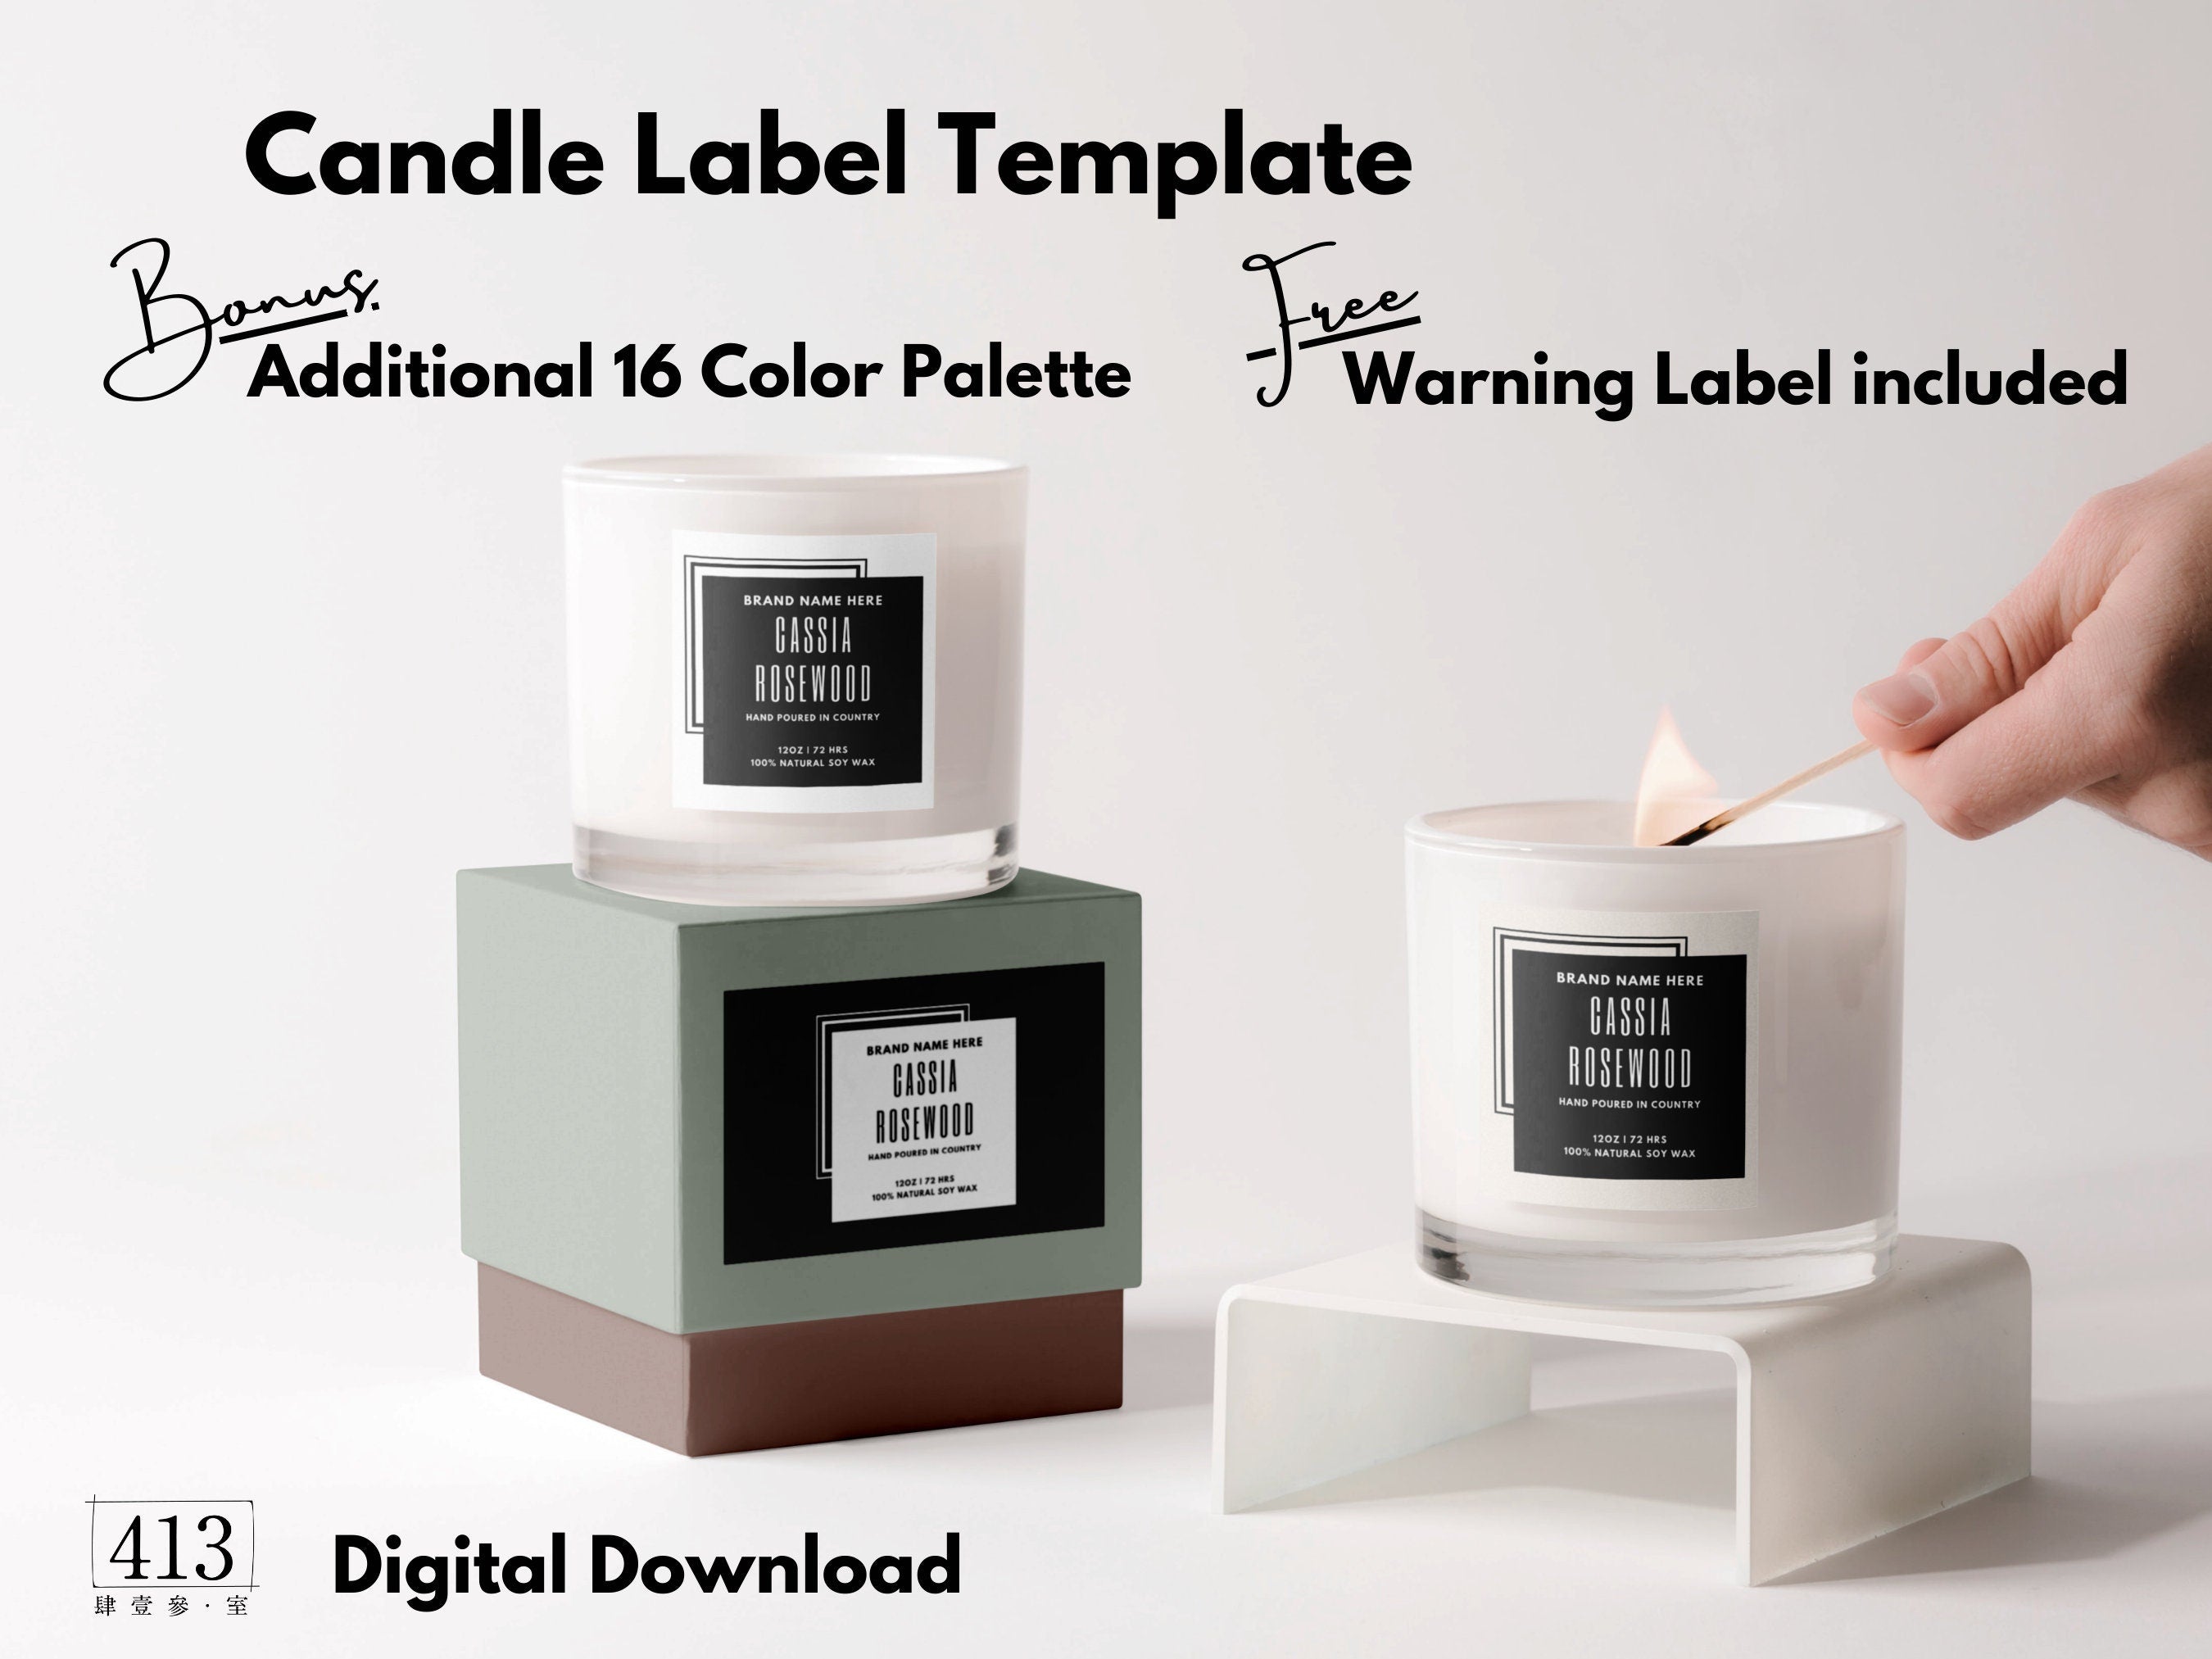 How to Design Cautionary Candle Labels